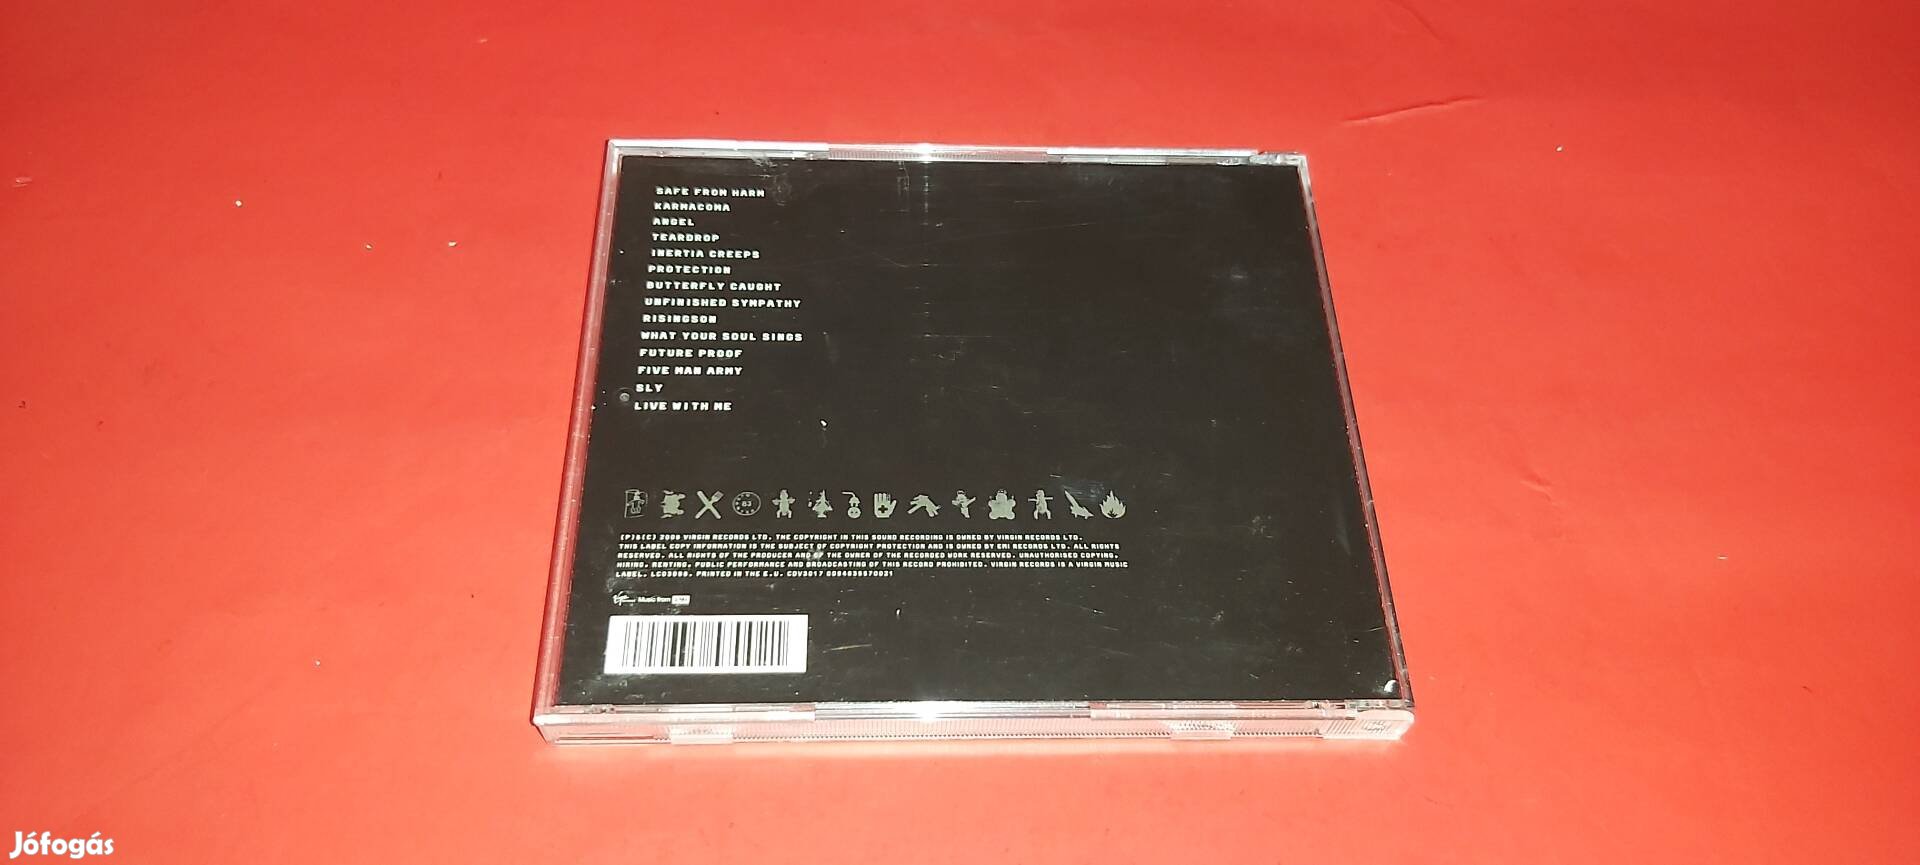 Massive Attack Collected Best of Cd 2006